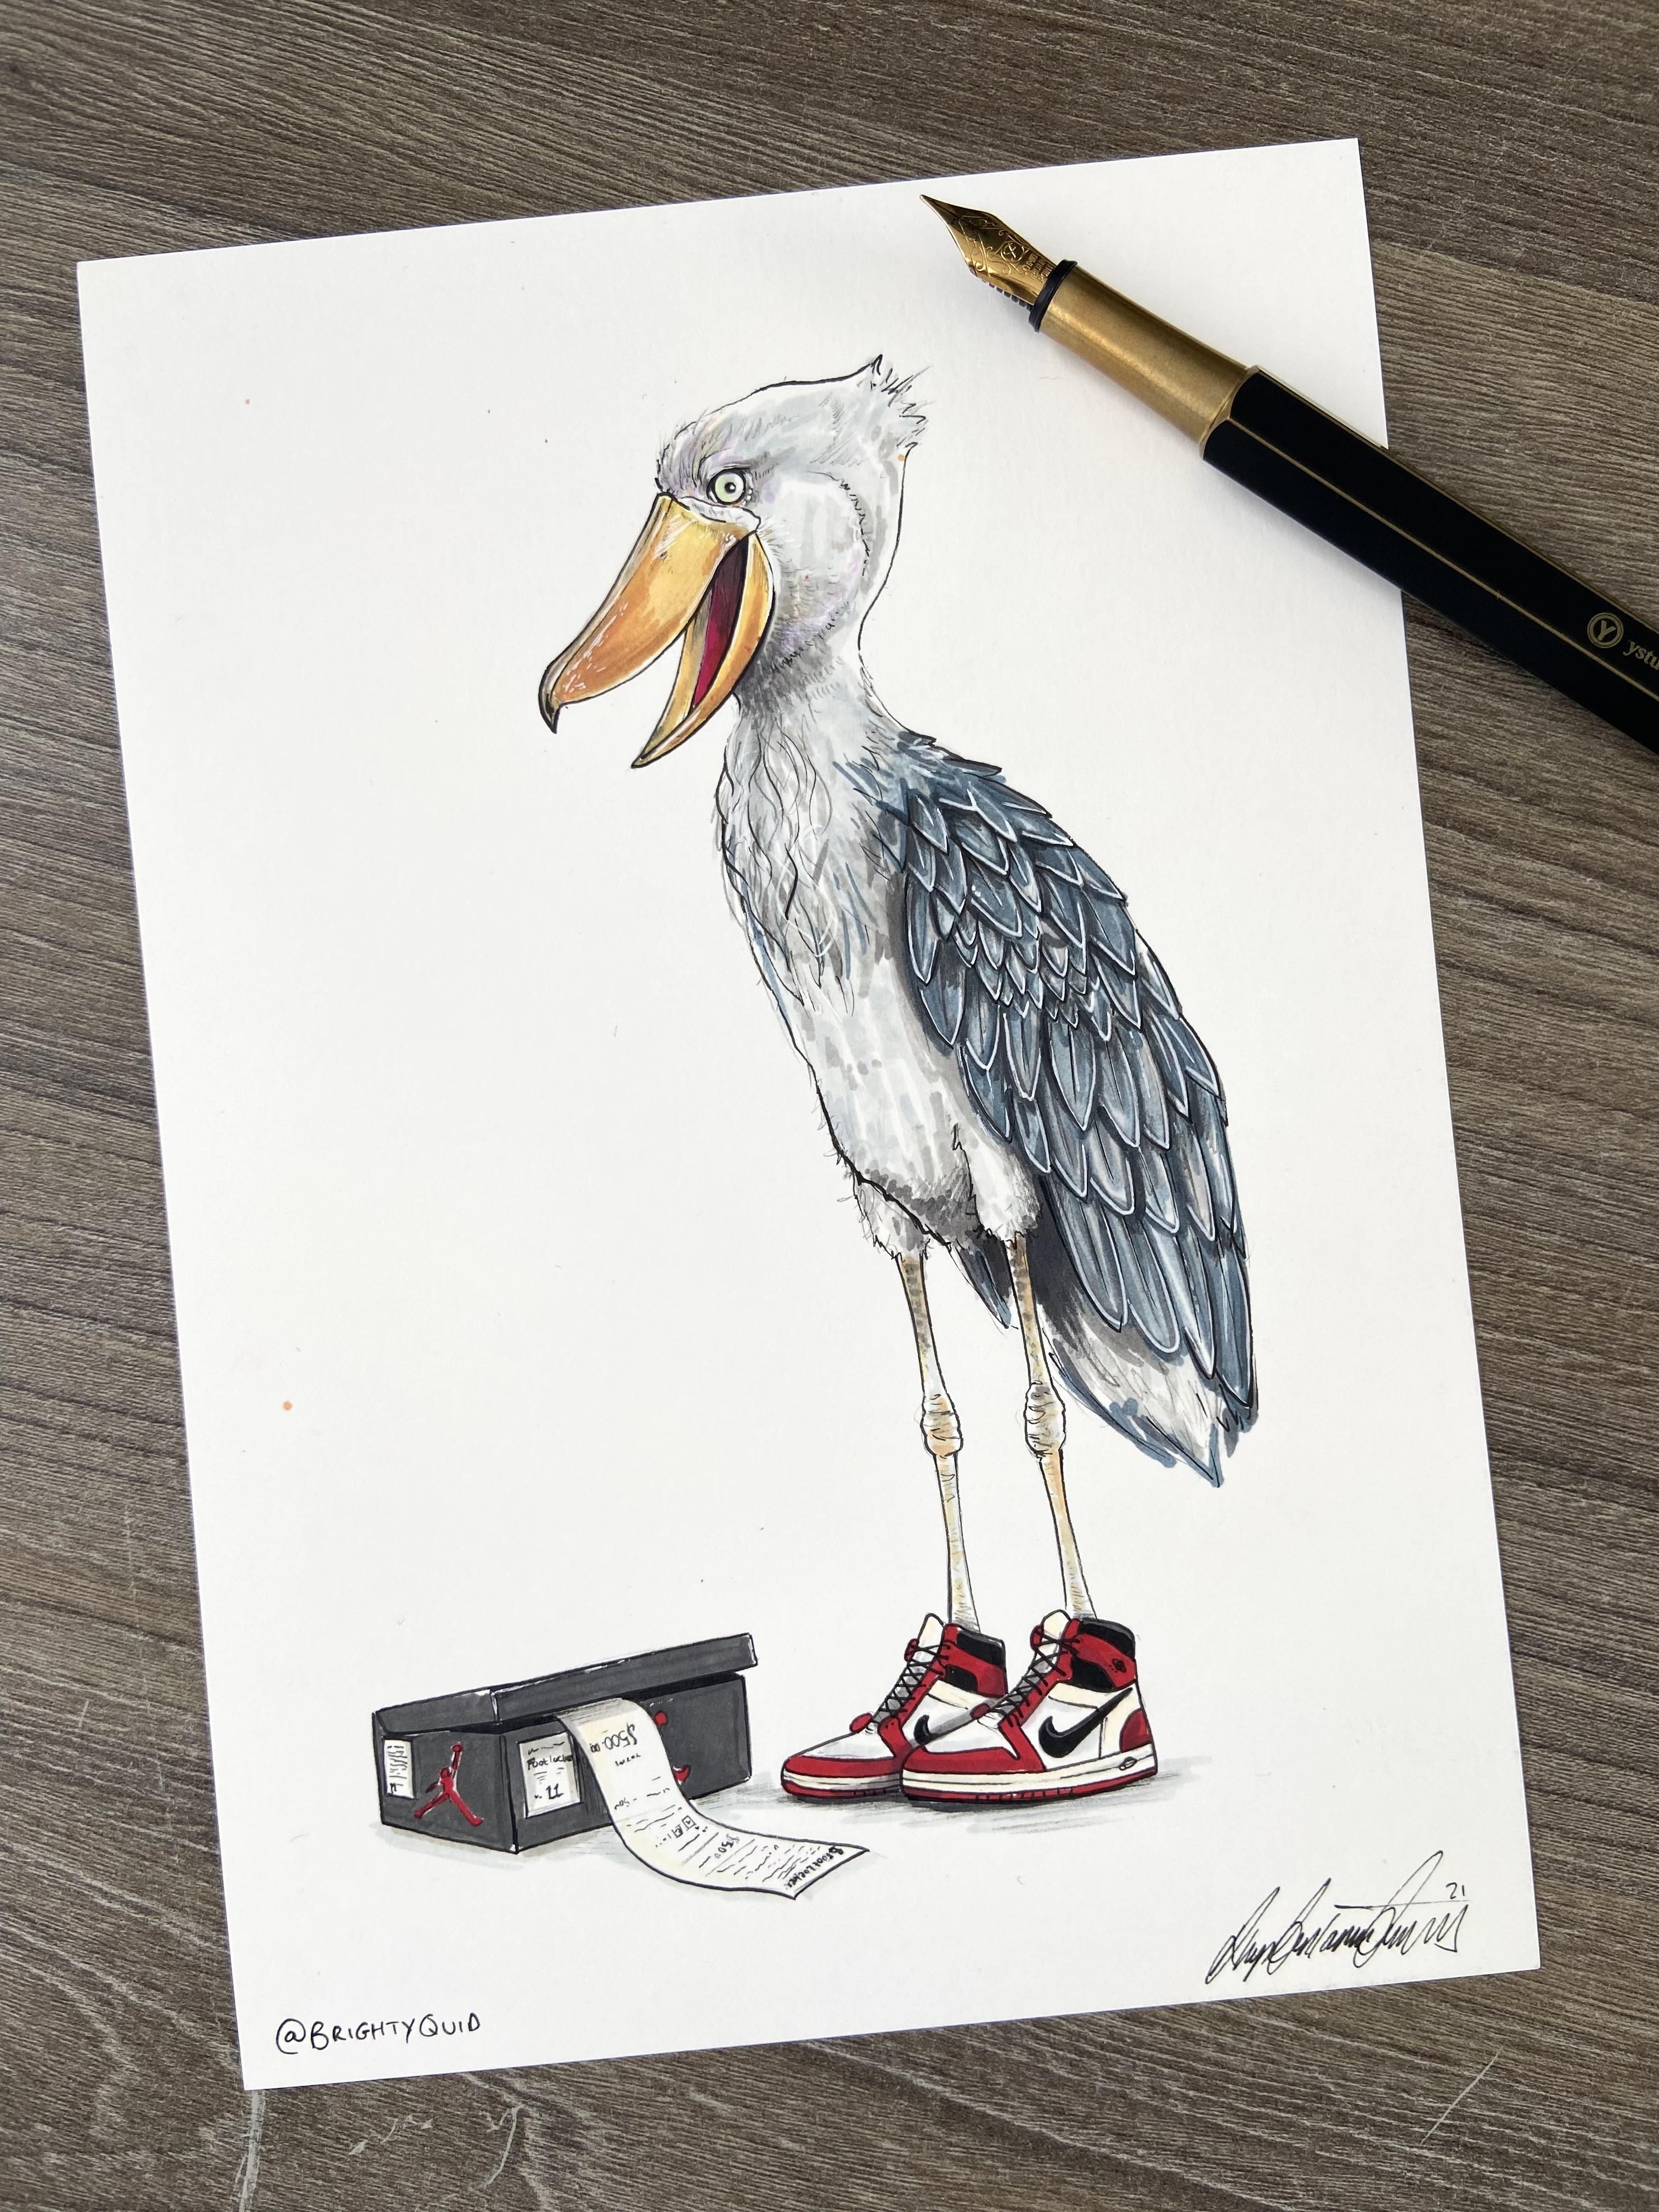 Shoebill with a shoe bill - Ink Drawing